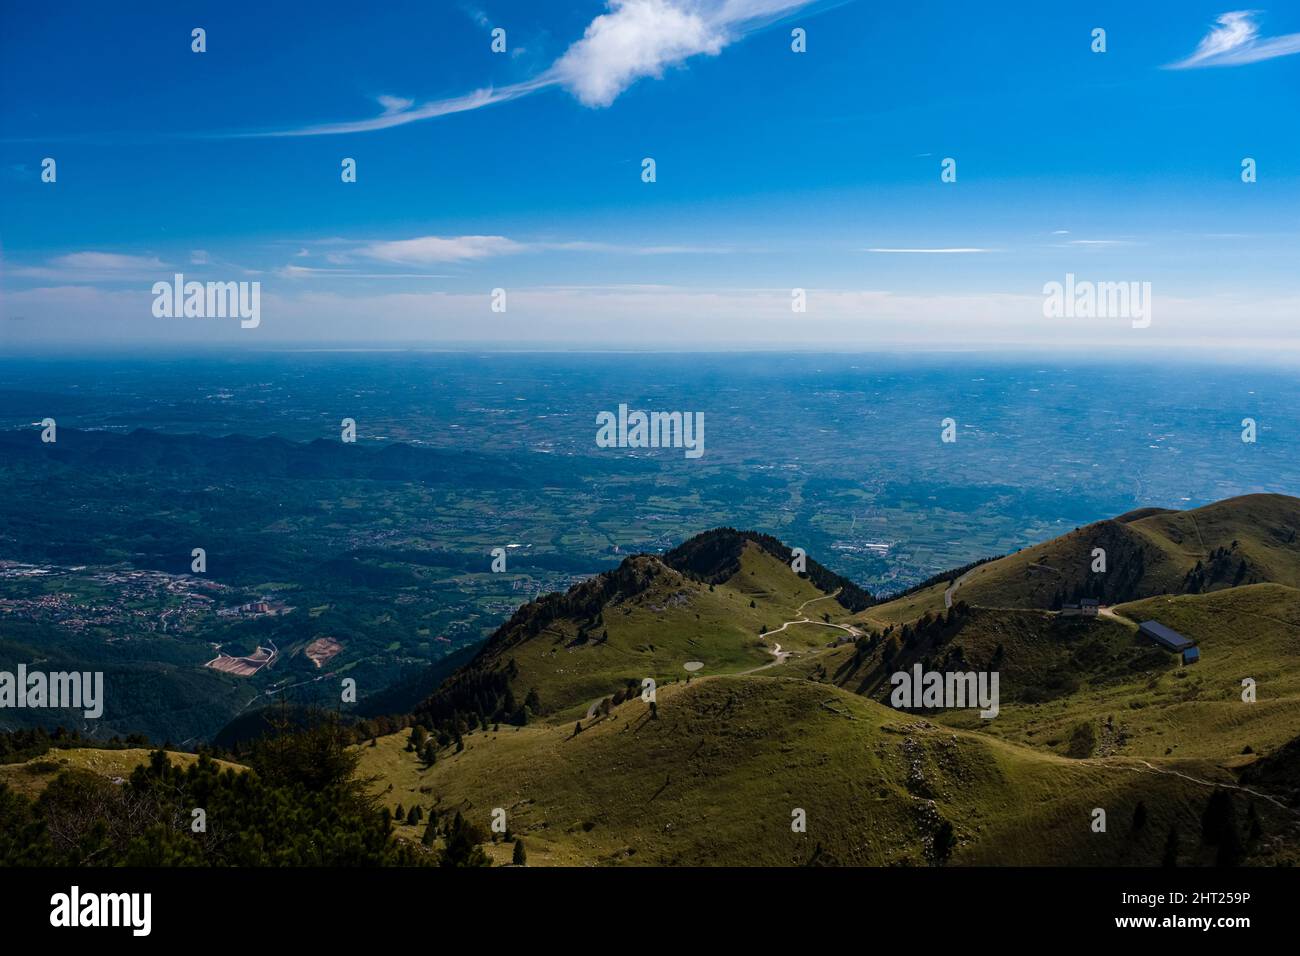 View from the top of Monte Grappa towards the south, Venice in the far distance. Stock Photo